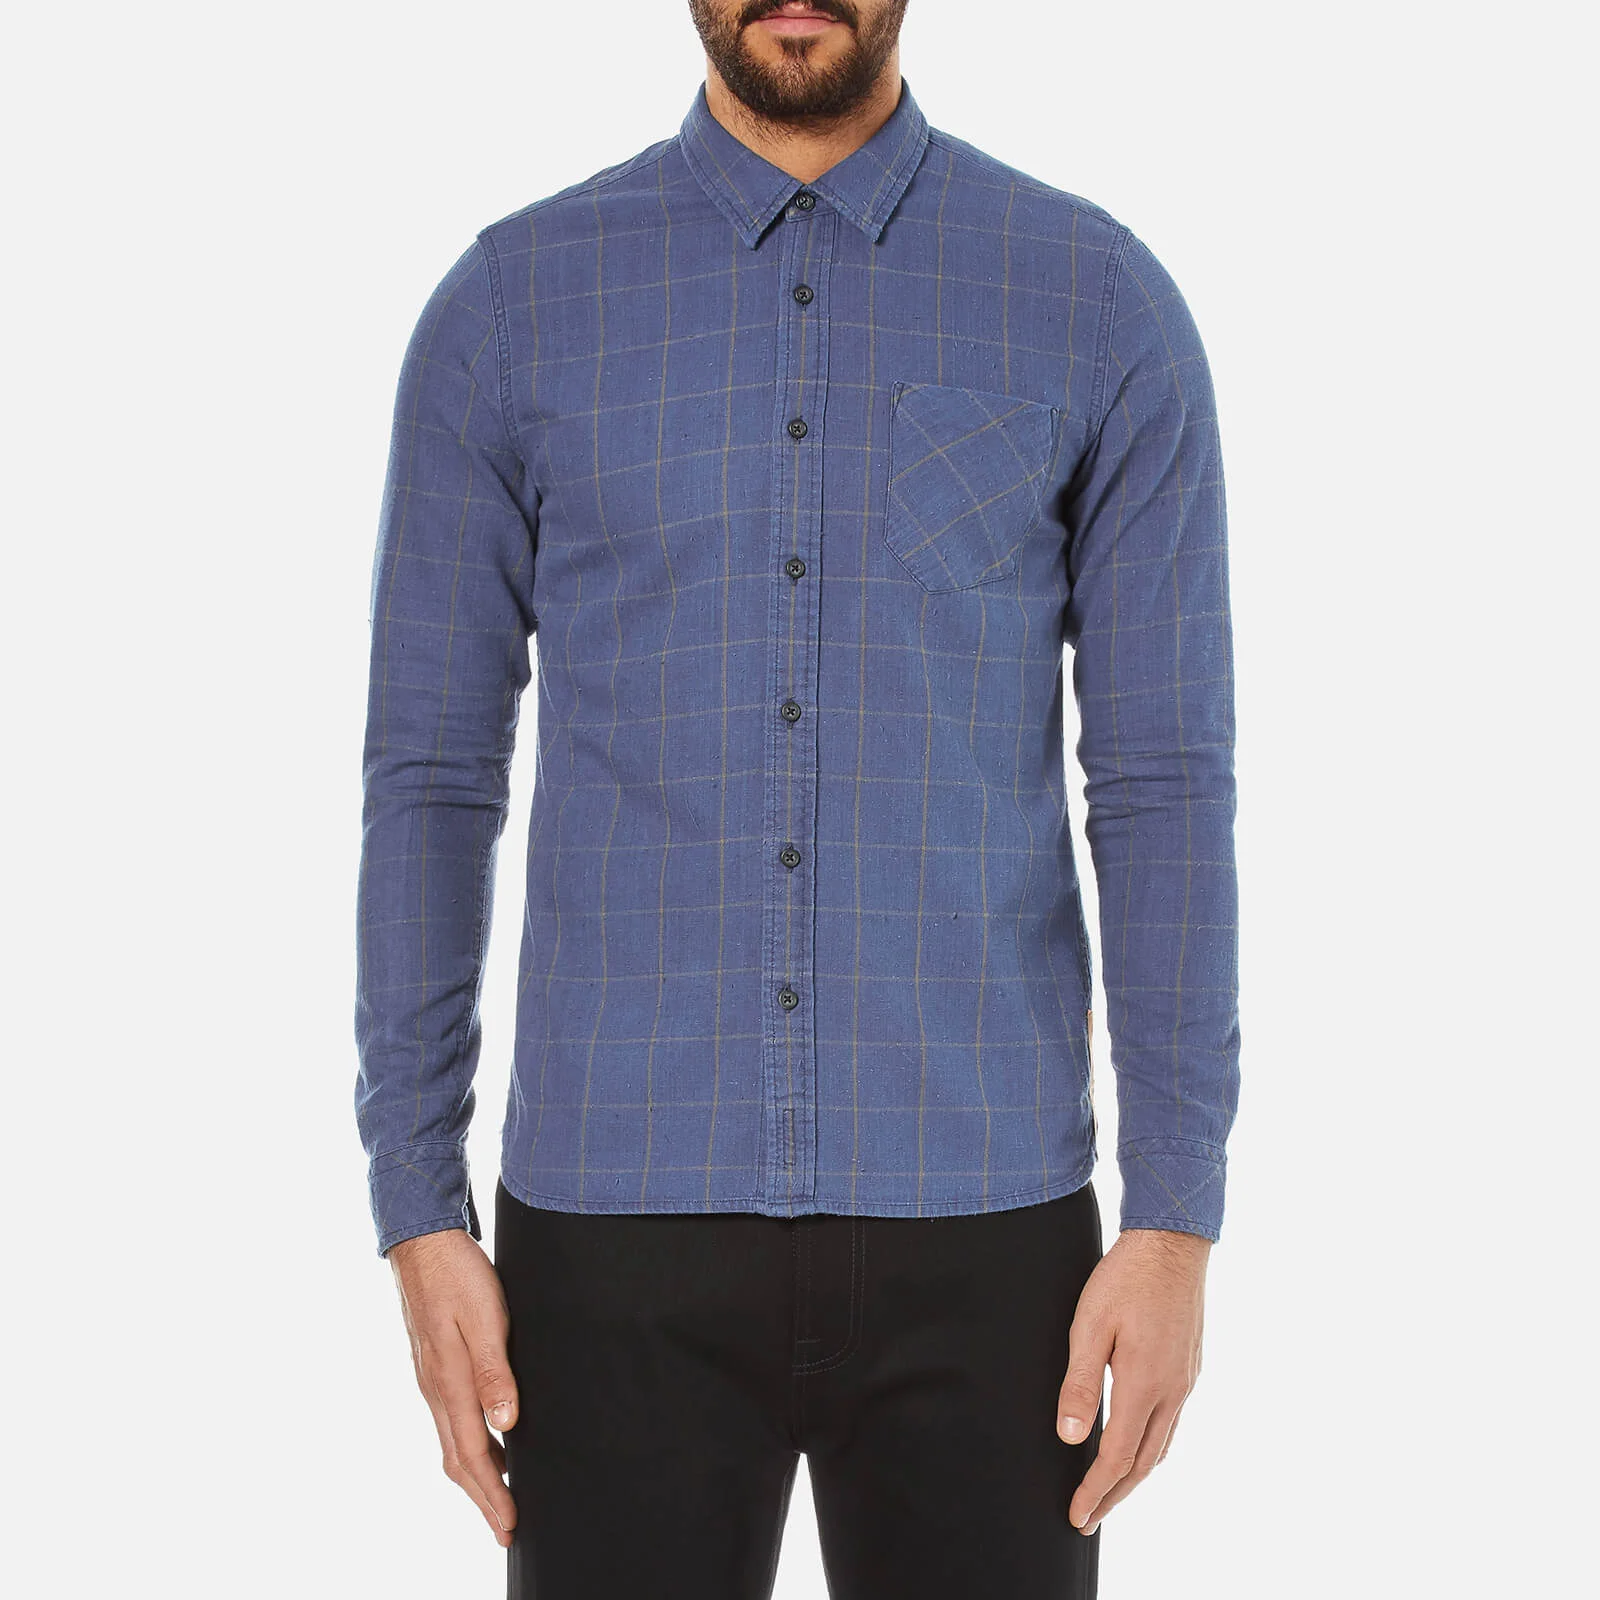 Nudie Jeans Men's Henry Flannel Check Shirt - Indigo Image 1